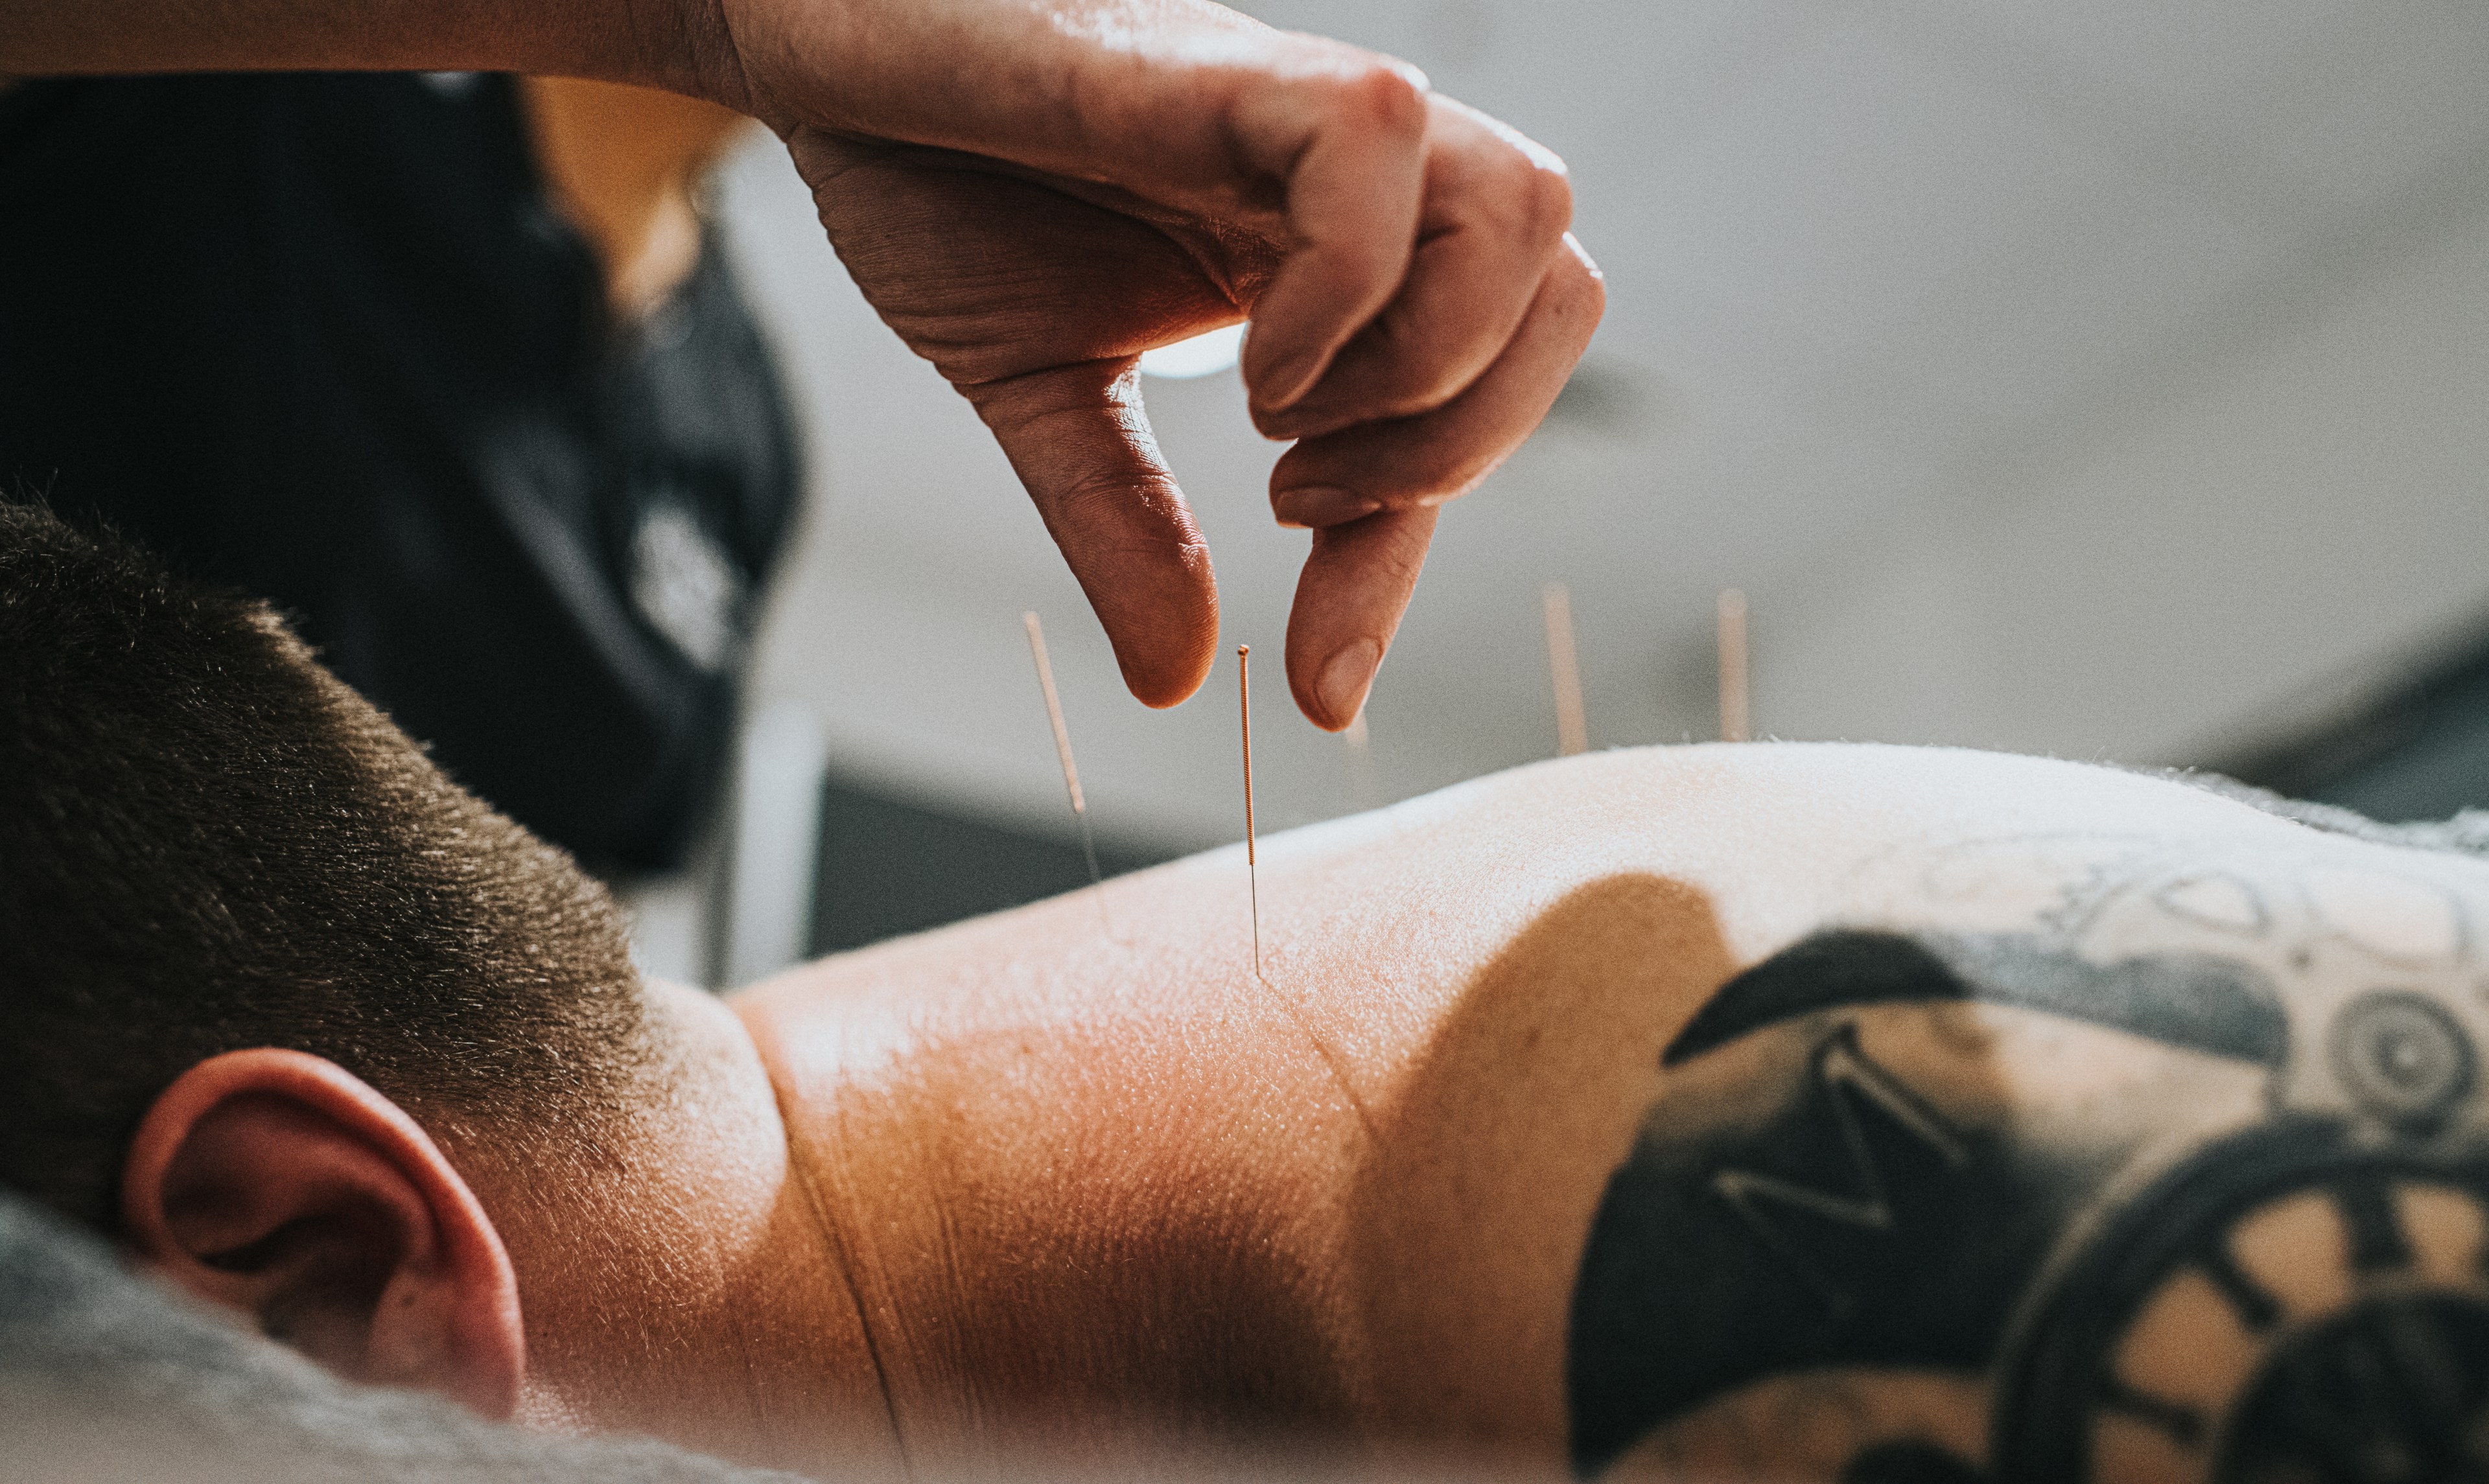 A person is lying face down, receiving acupuncture on their back. A hand is carefully inserting several thin needles into the skin.